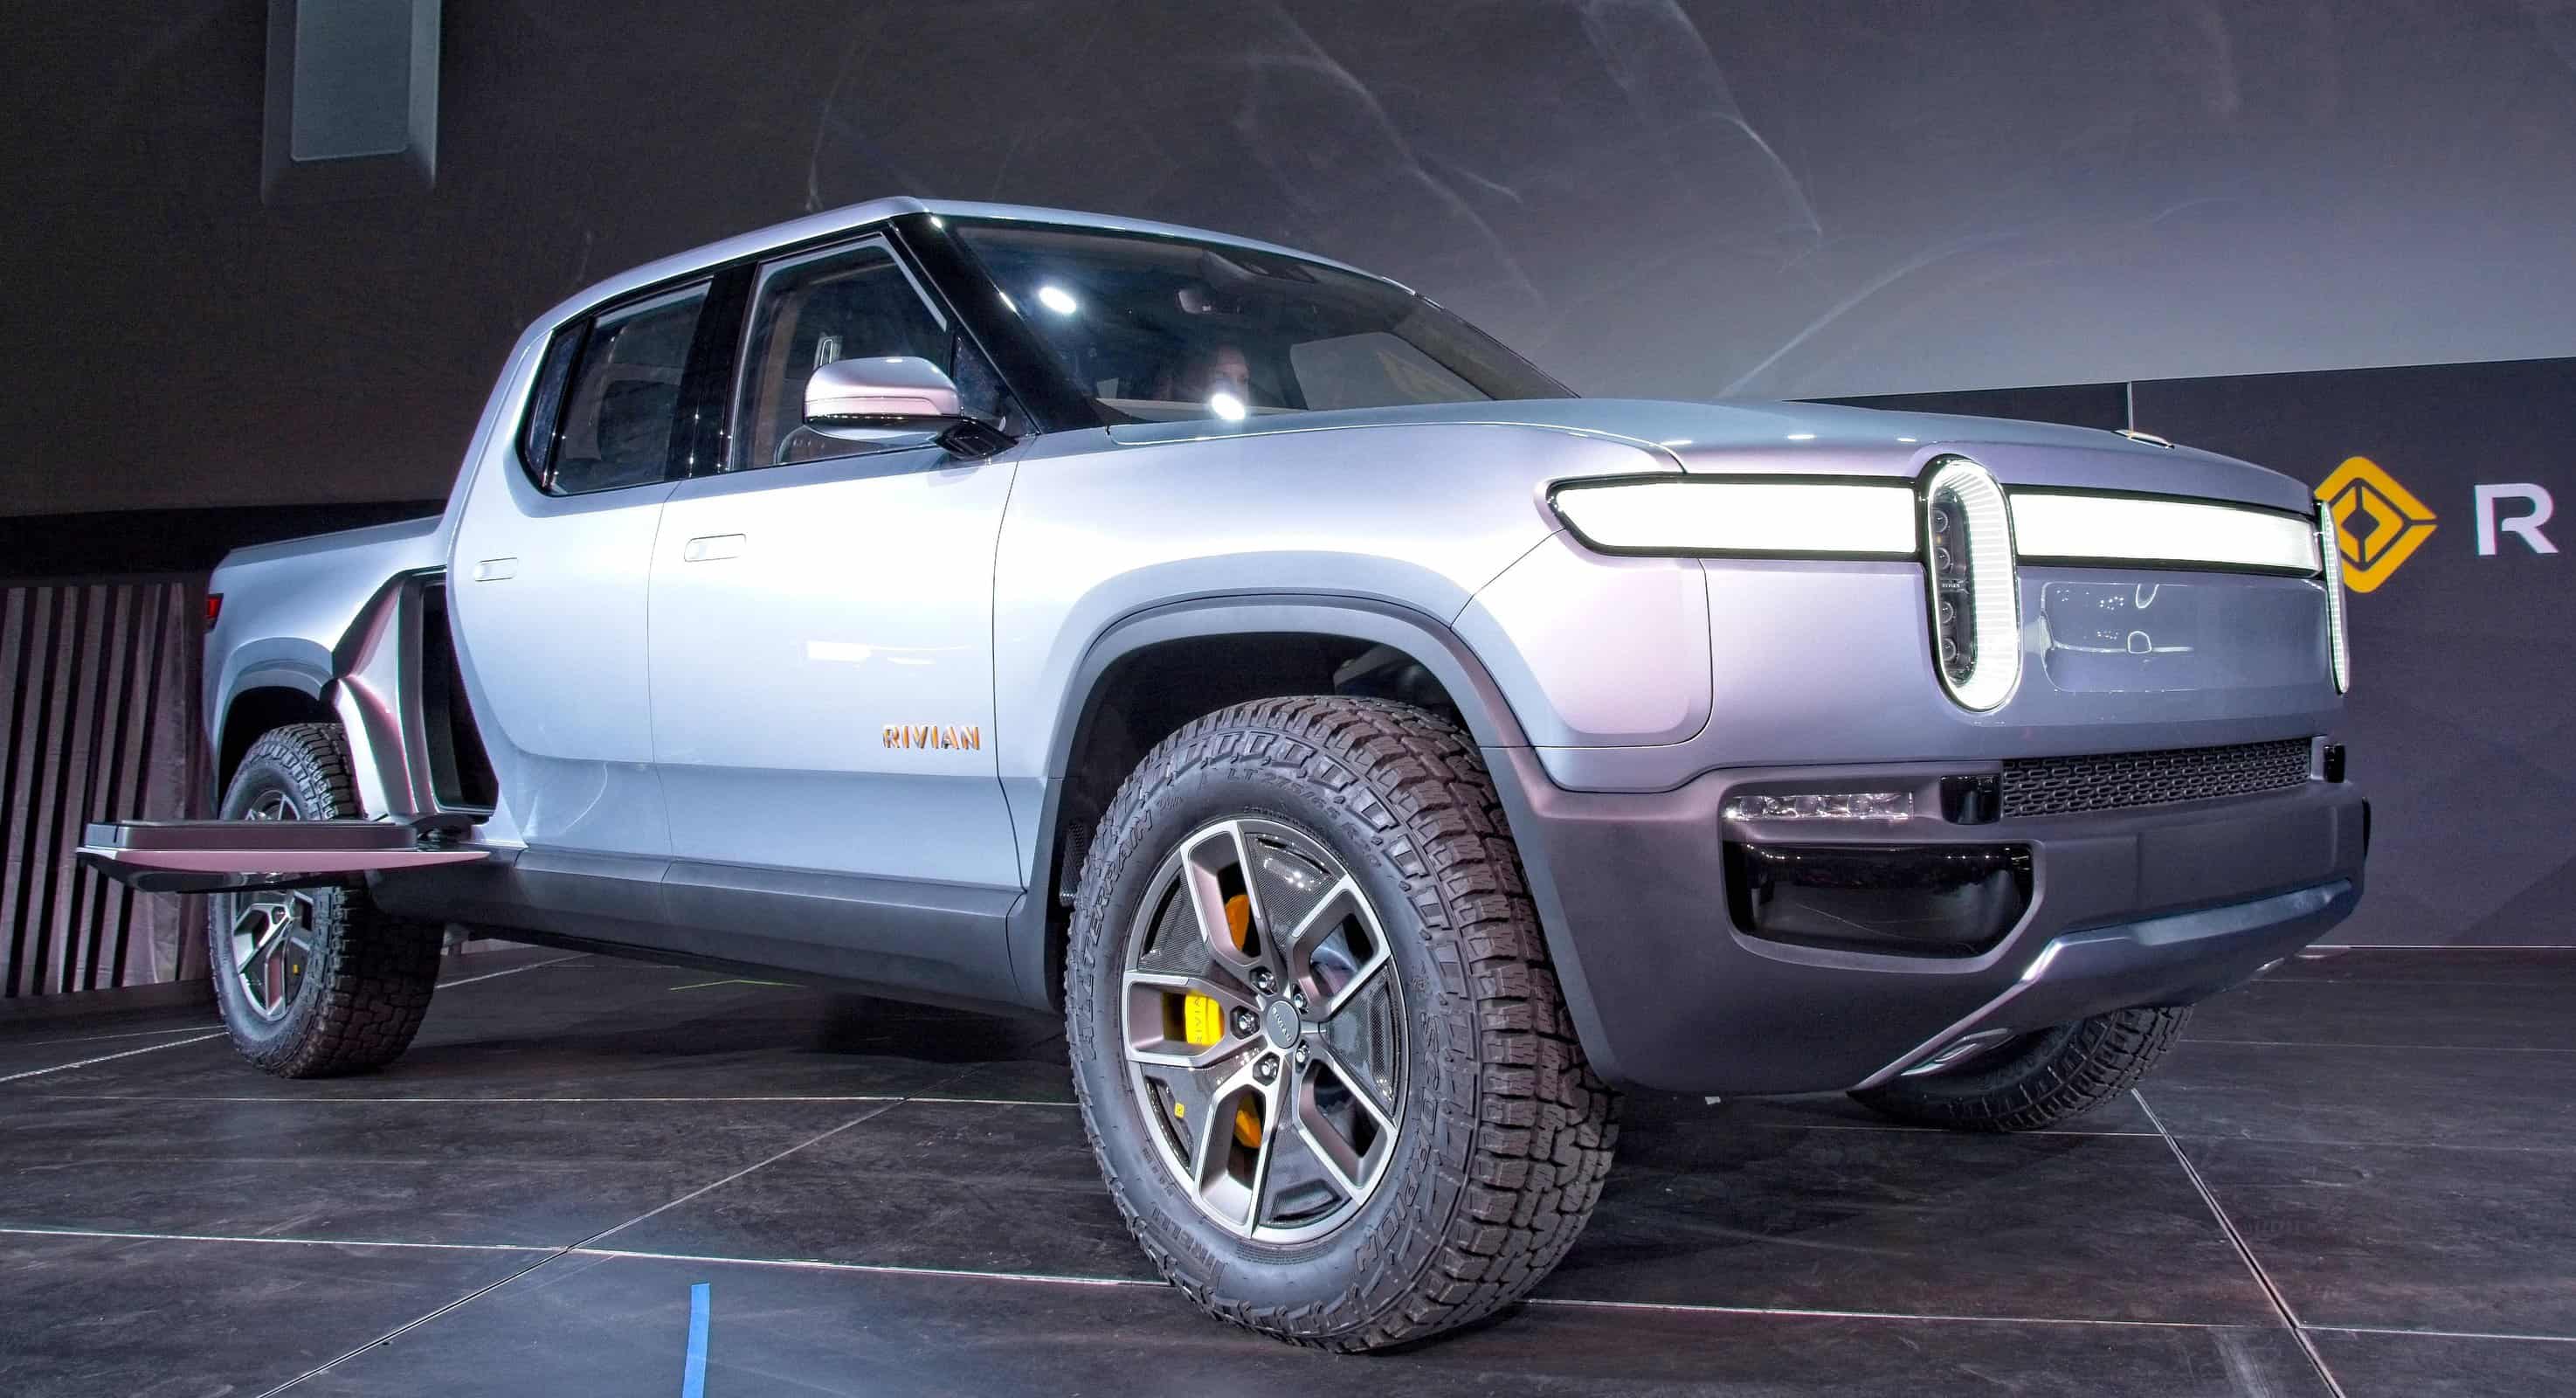 Debut of the Rivian R1T pickup at the 2018 Los Angeles Auto Show, November 27, 2018 by Richard Truesdell